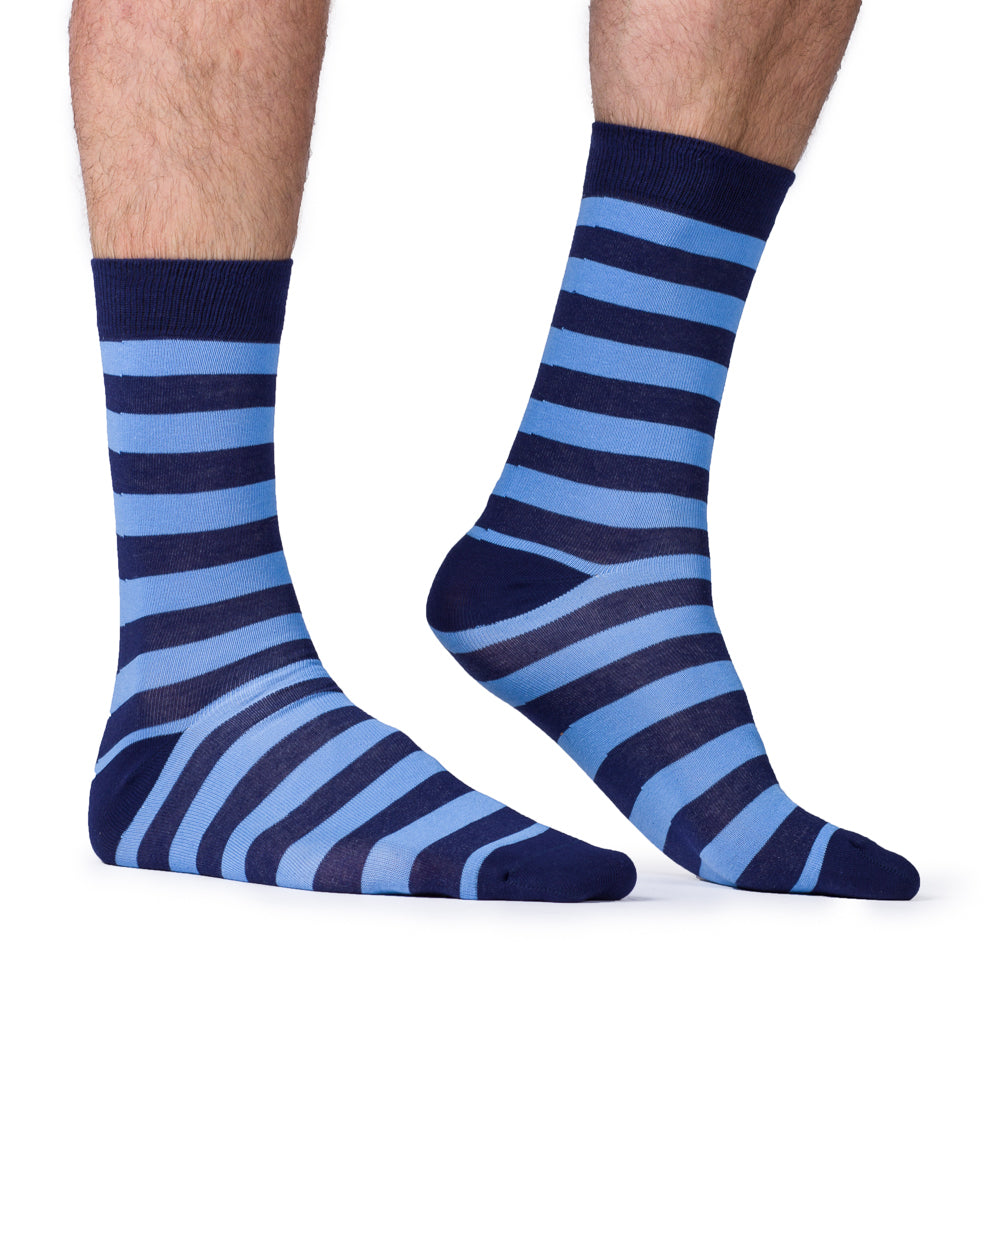 2t Patterned Socks 2 Pairs (mixed stripe)